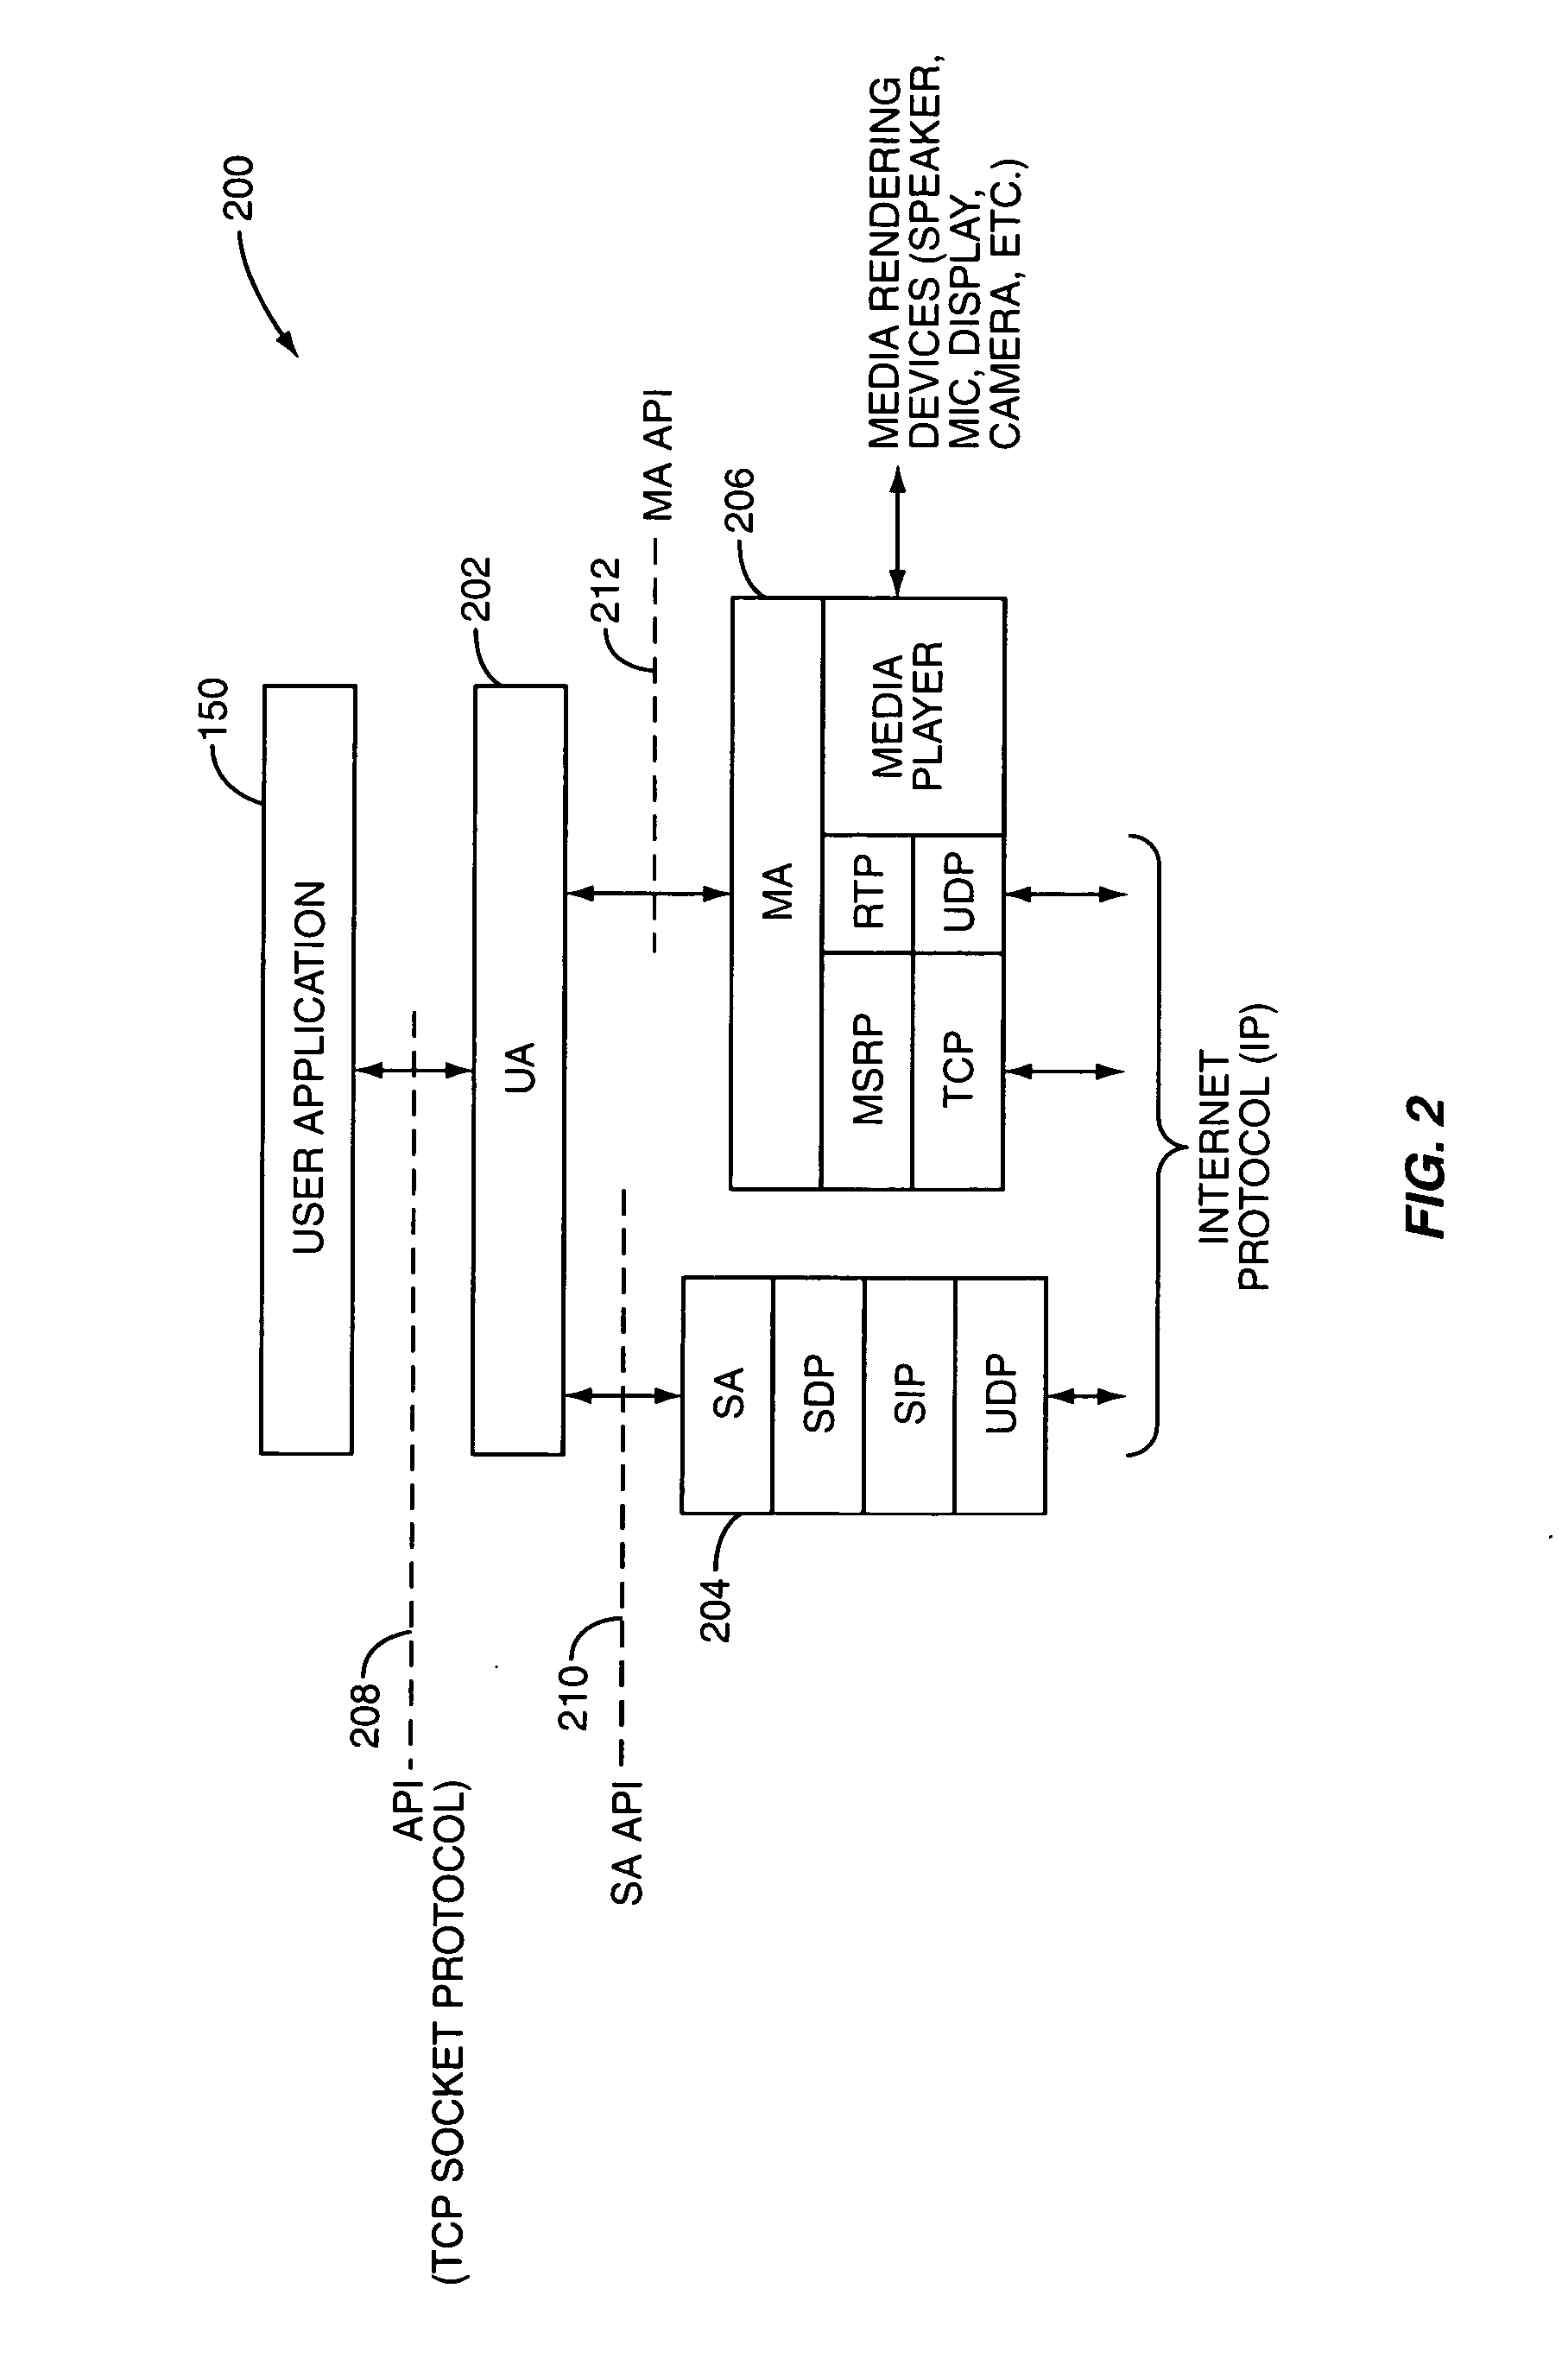 Multi-user media client for communication devices